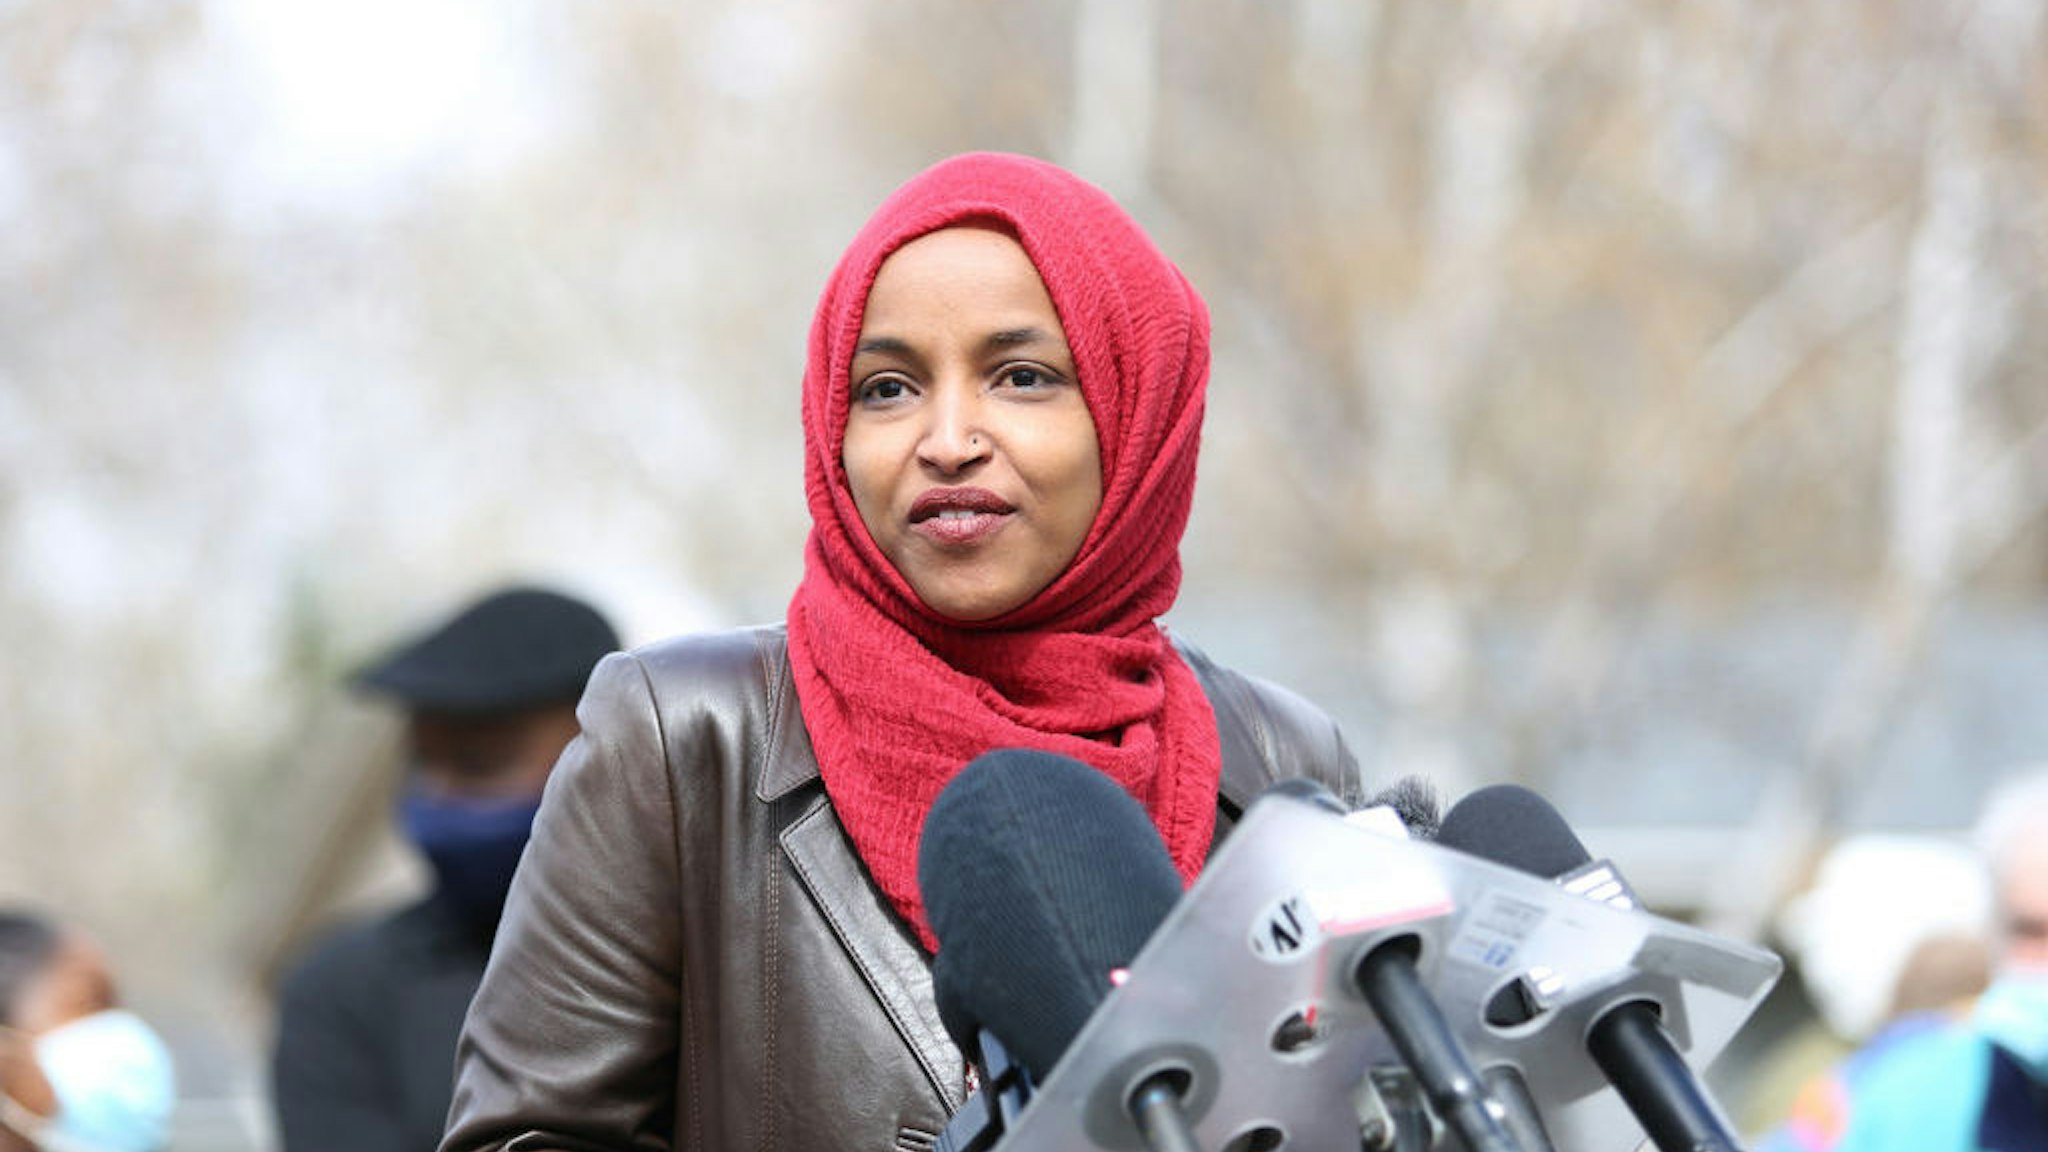 Representative Ilhan Omar, a Democrat from Minnesota, speaks during a press conference near the site of Daunte Wright's death in Brooklyn Center, Minnesota, U.S., on Tuesday, April 20, 2021. The case of the former Minneapolis police officer accused of killing George Floyd went to the jury after Derek Chauvin's defense attorney said the viral video of him kneeling on Floyd's neck and back doesn't tell the entire story. Photographer: Emilie Richardson/Bloomberg